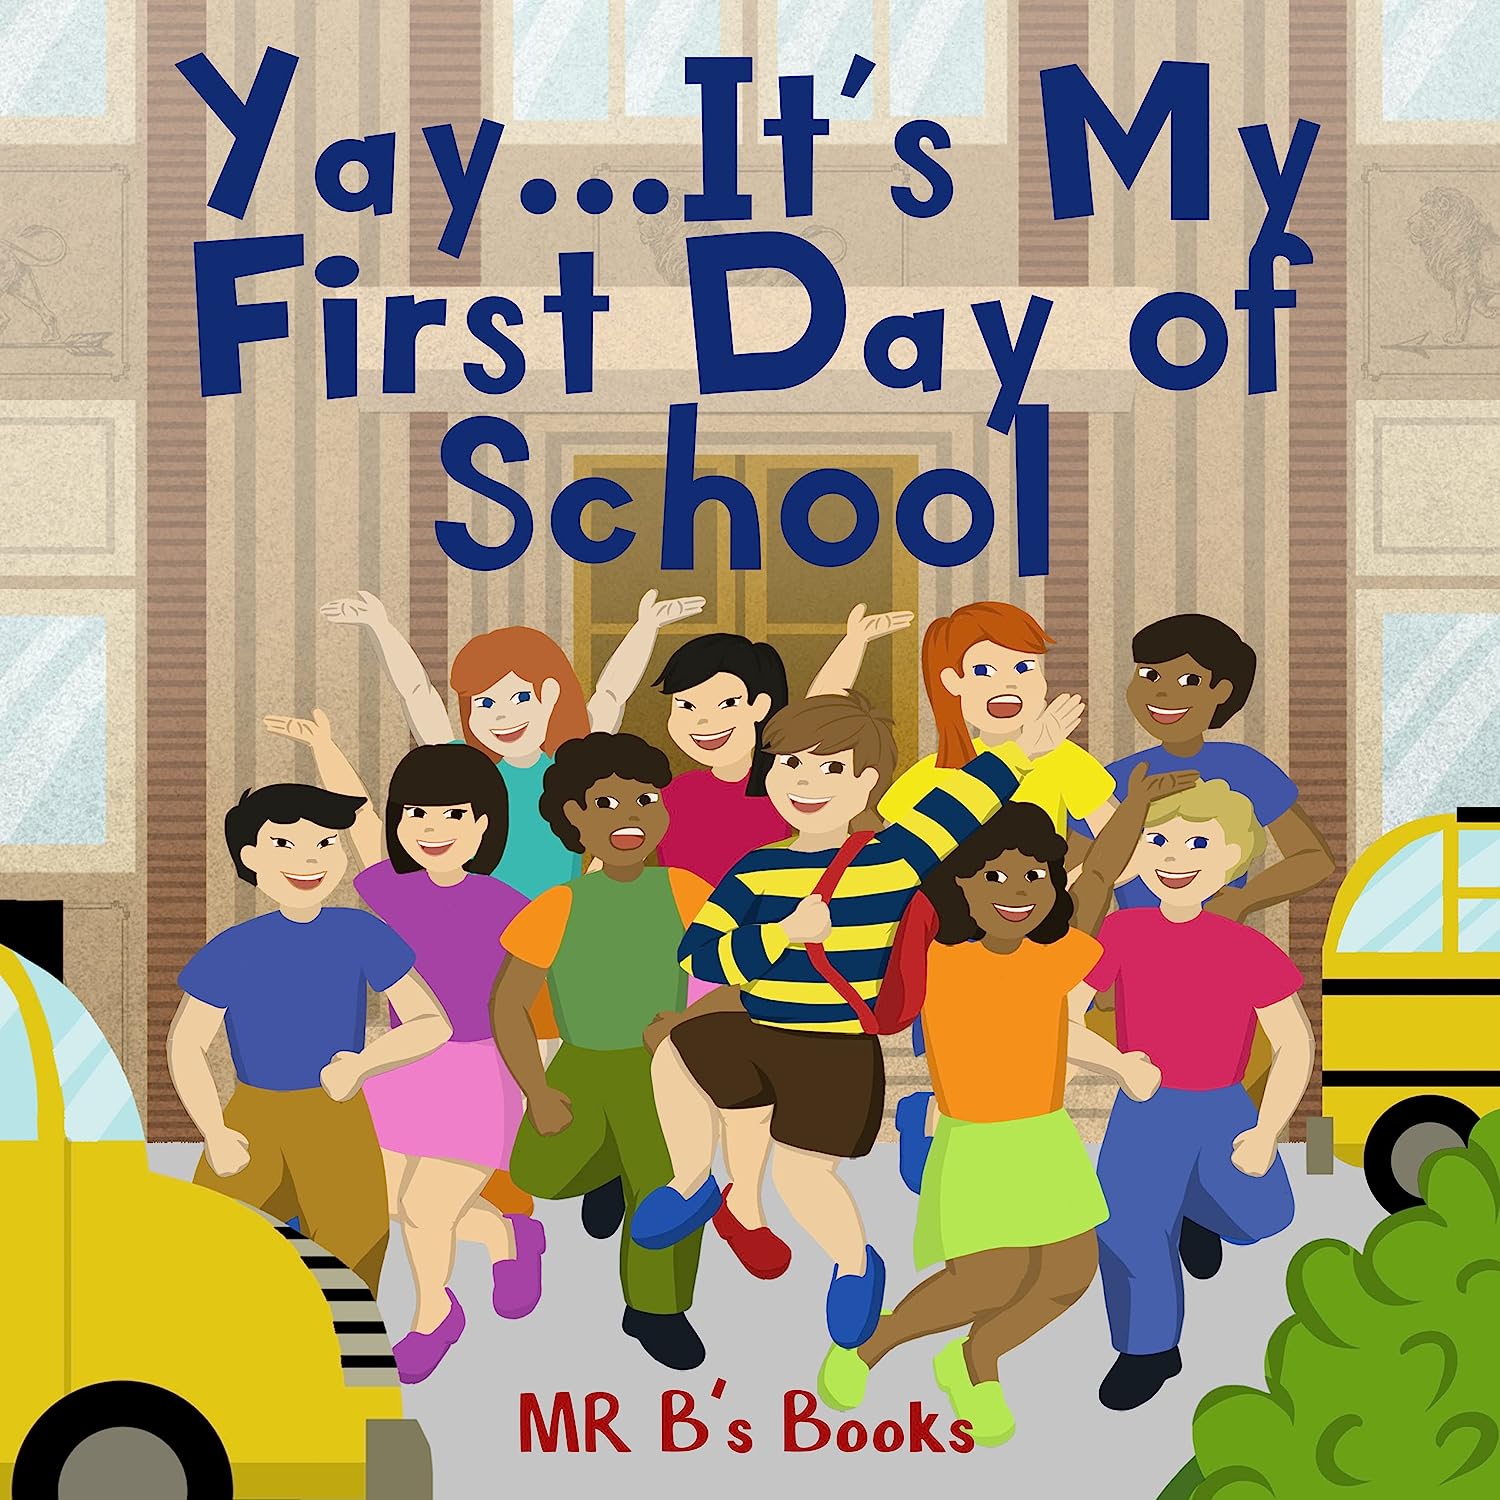 New children’s book "Yay… It’s My First Day of School" by Mr. B’s Books (Michael Barnes) is released, a joyful story of making friends, meeting teachers, and having a great first day